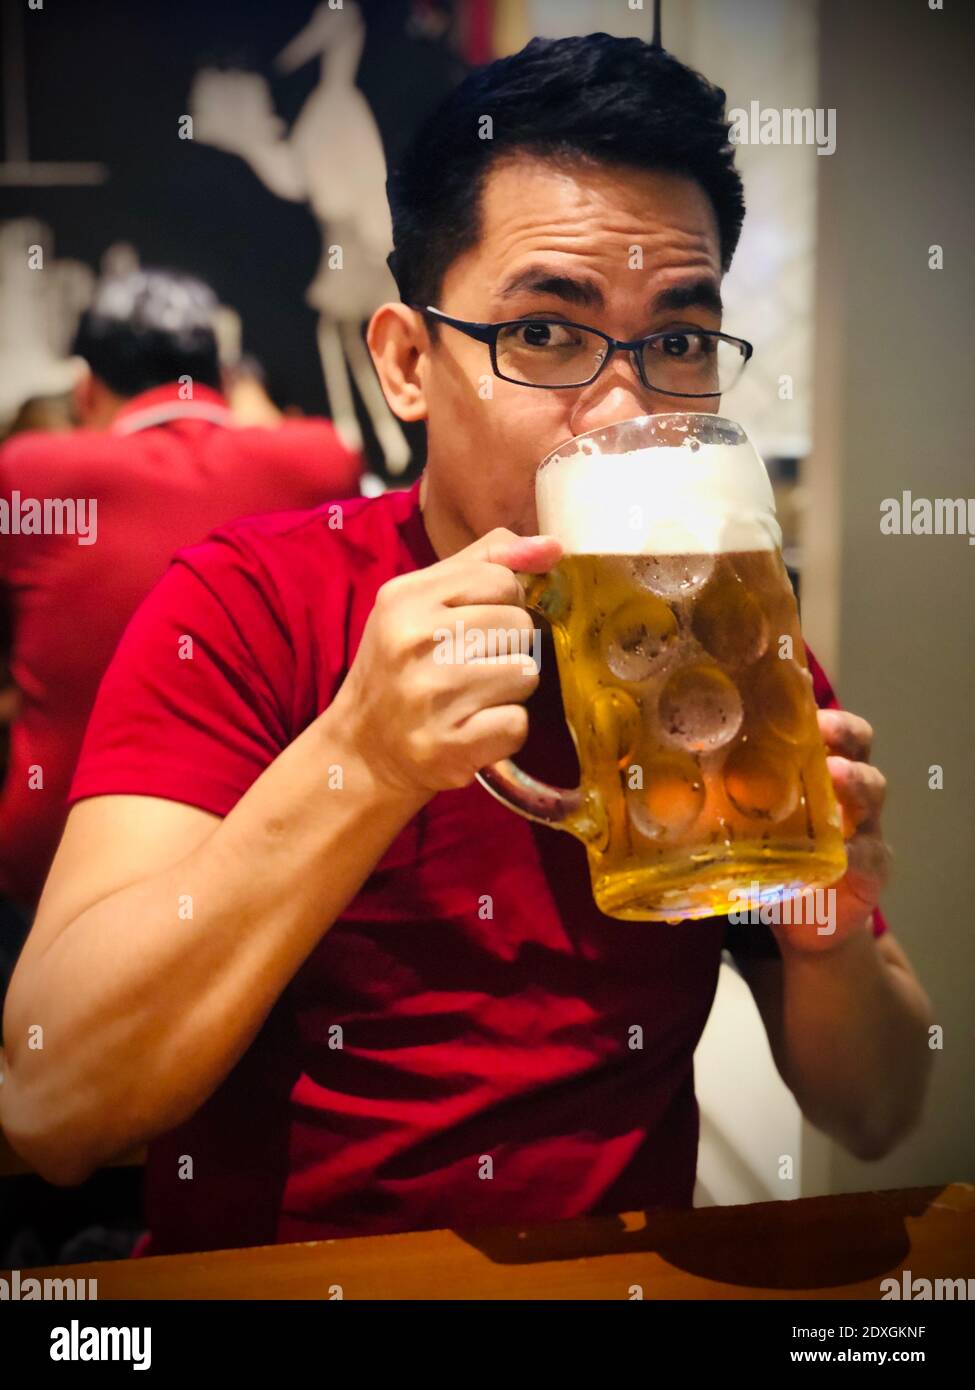 Portrait Of A Man Drinking Beer In Big Glass Stock Photo - Alamy